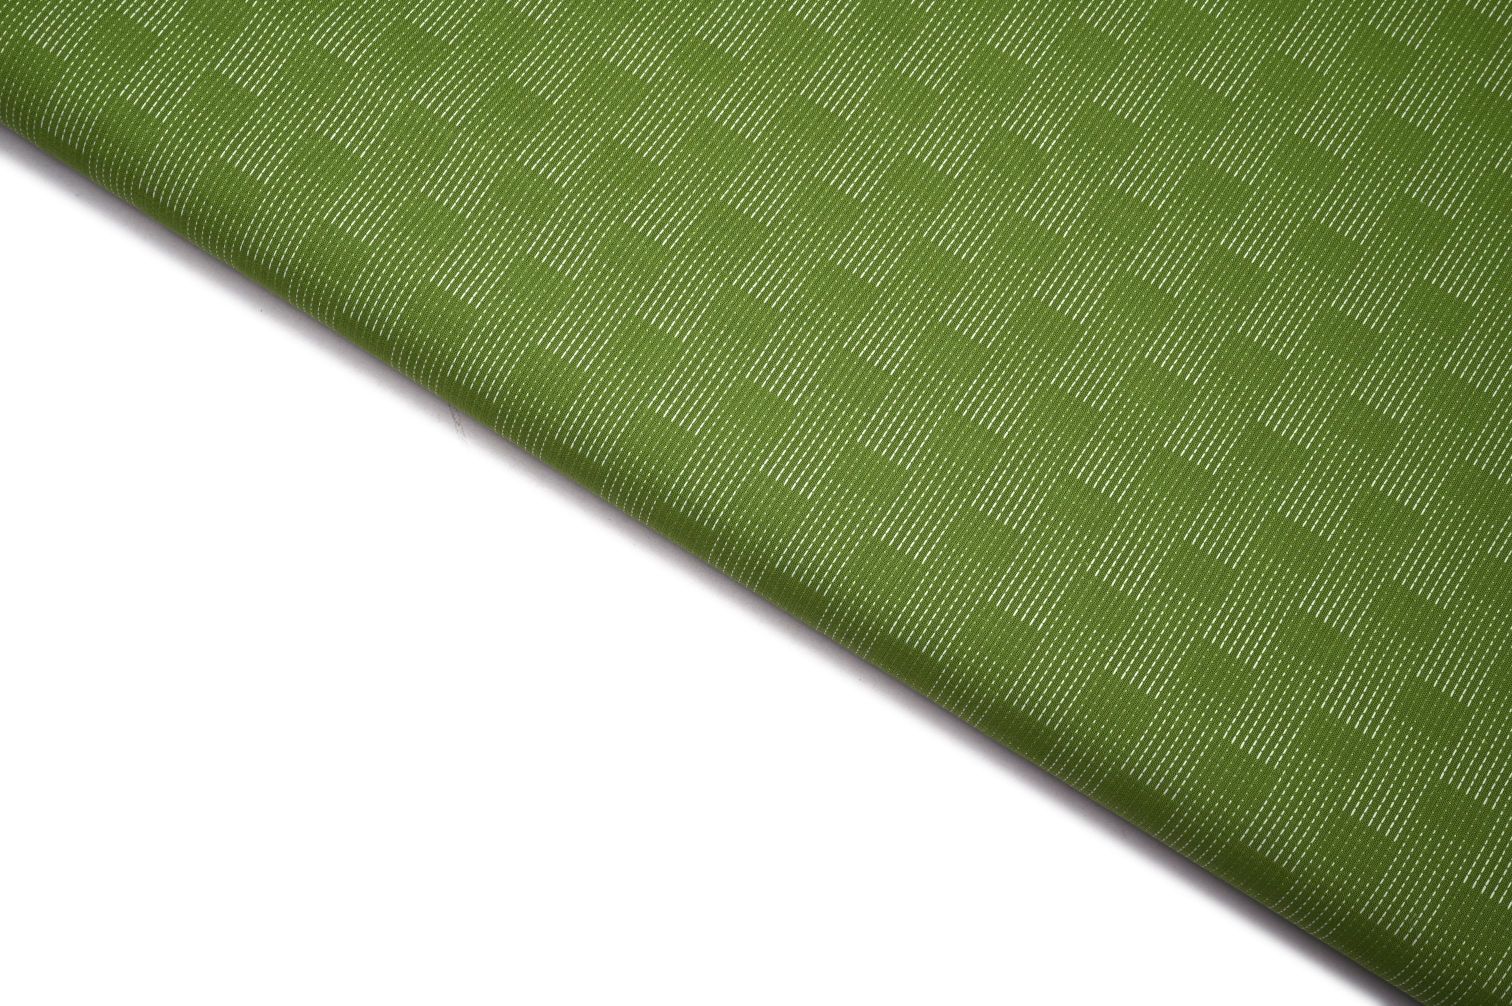 GUAVA GREEN COLOR COTTON WHITE THREAD CHAIN STITCH WEAVE SQUARE CHAIN LINKED PATTERN HANDLOOM FABRIC 11662